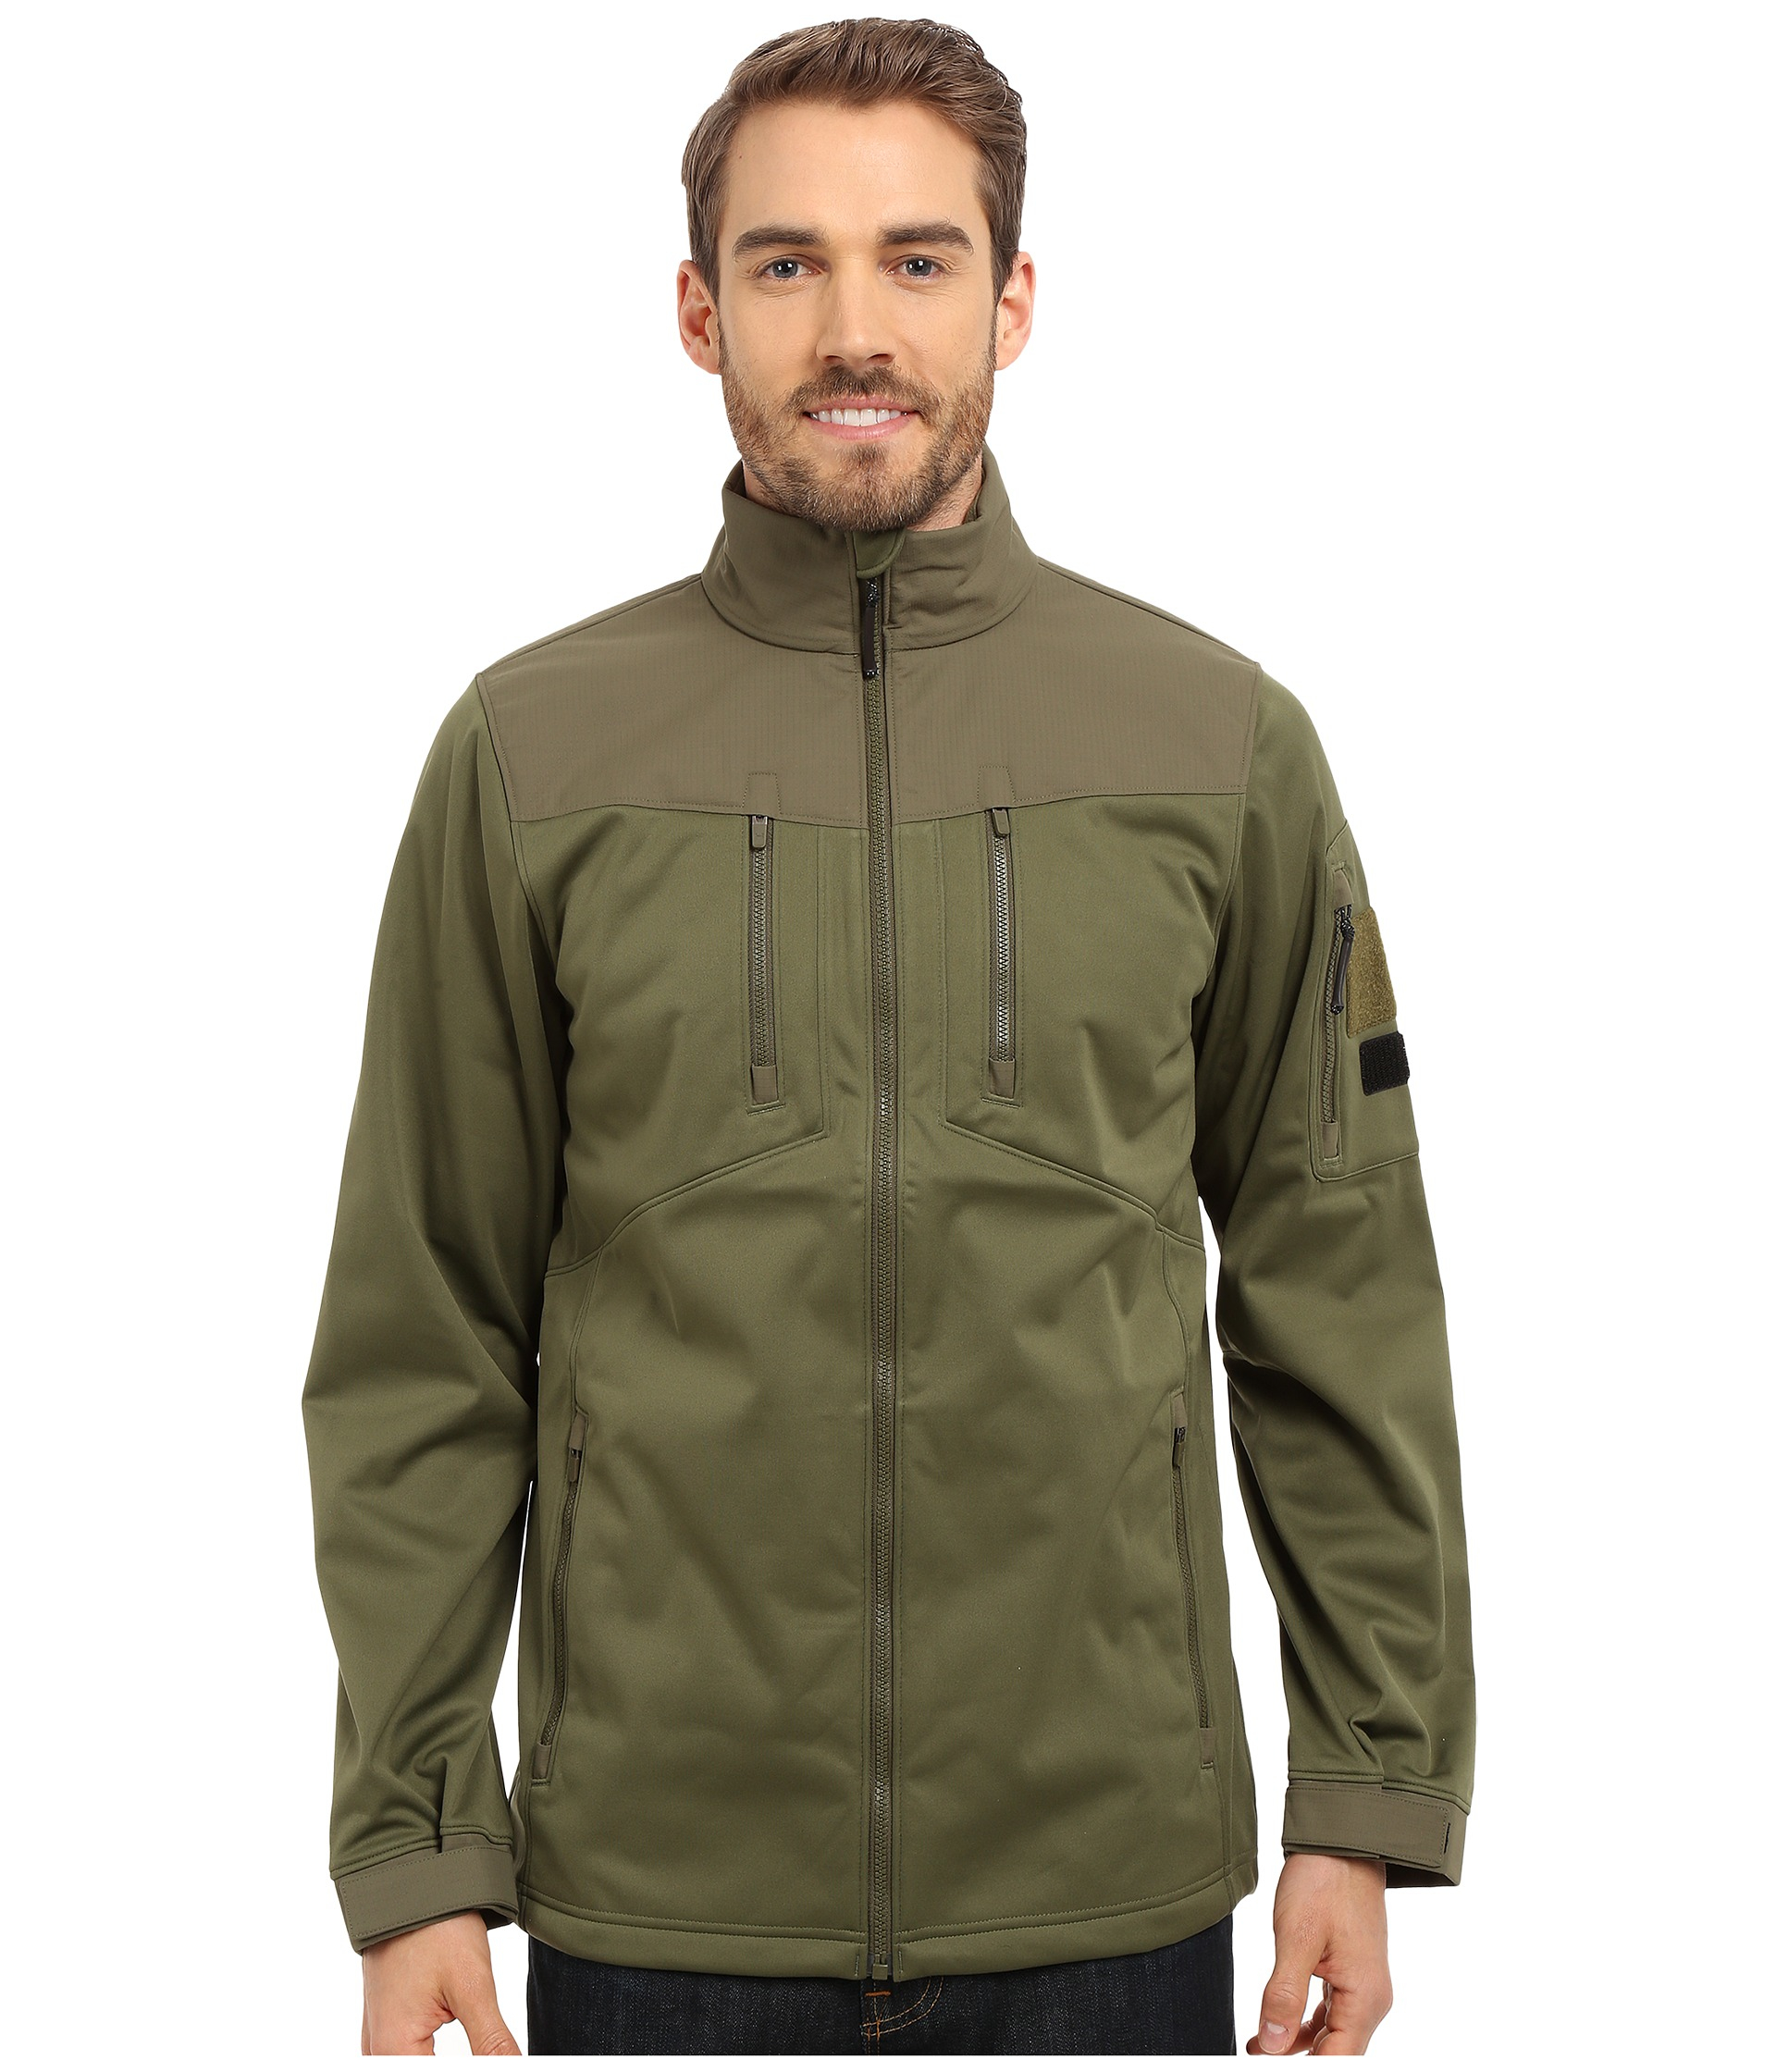 Under Armour Mens Night Vision Tactical Jacket